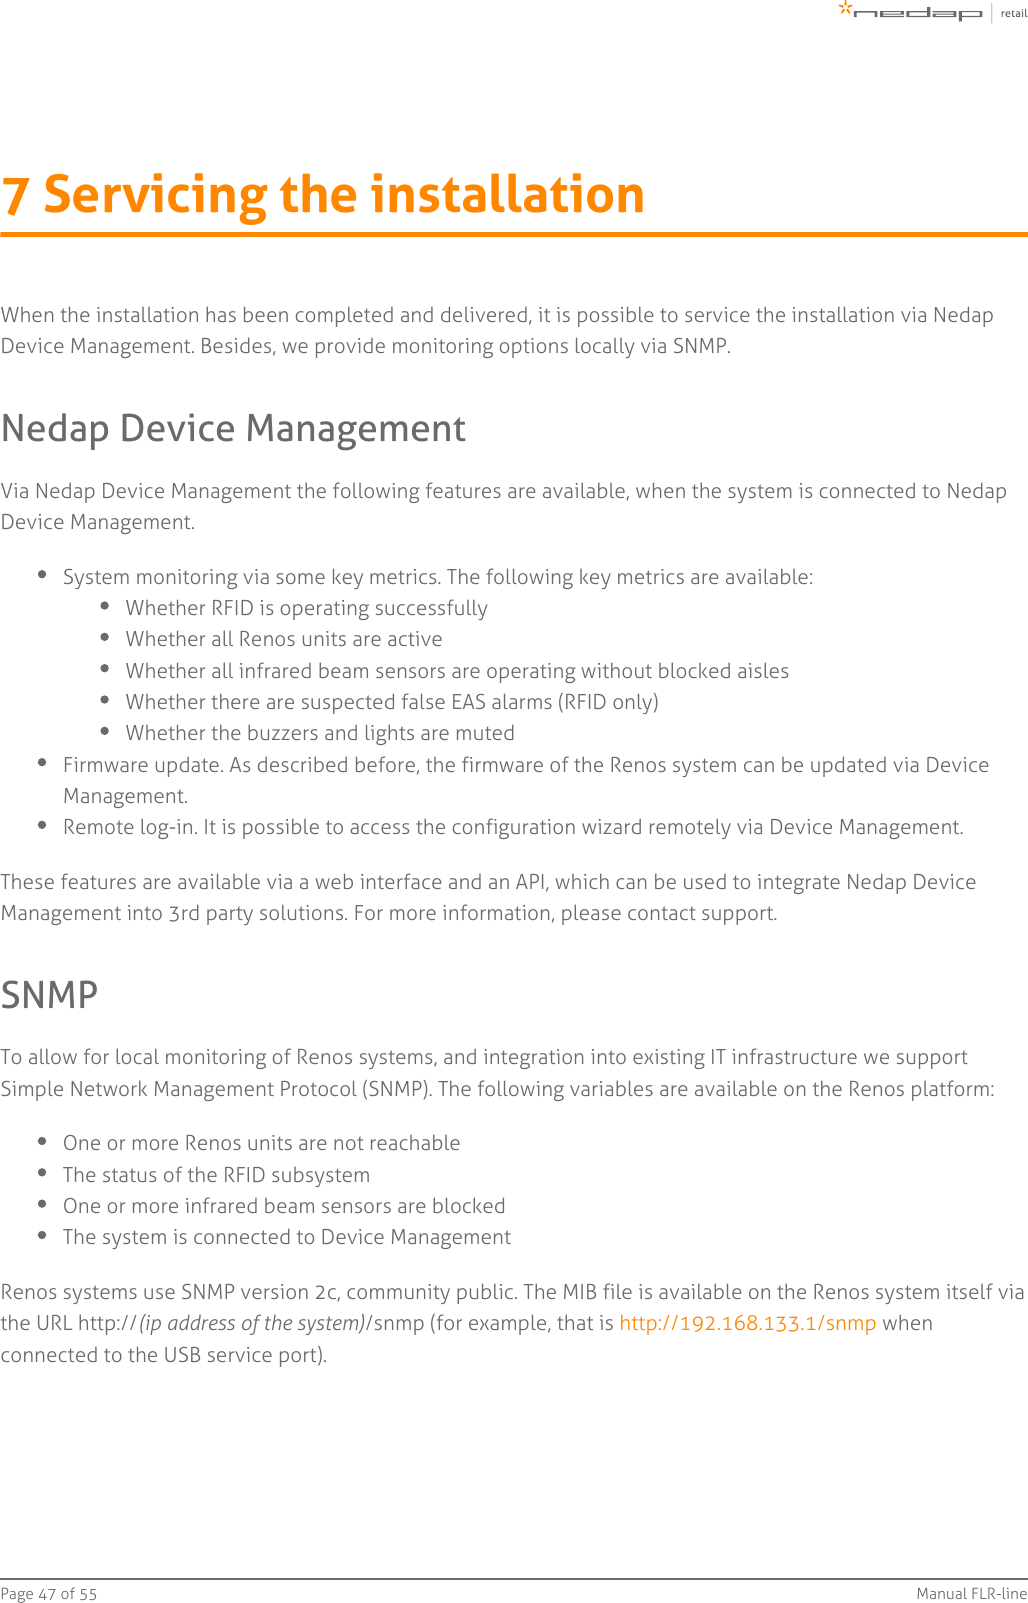 Page   of 47 55 Manual FLR-line7 Servicing the installationWhen the installation has been completed and delivered, it is possible to service the installation via NedapDevice Management. Besides, we provide monitoring options locally via SNMP.Nedap Device ManagementVia Nedap Device Management the following features are available, when the system is connected to NedapDevice Management.System monitoring via some key metrics. The following key metrics are available:Whether RFID is operating successfullyWhether all Renos units are activeWhether all infrared beam sensors are operating without blocked aislesWhether there are suspected false EAS alarms (RFID only)Whether the buzzers and lights are mutedFirmware update. As described before, the firmware of the Renos system can be updated via DeviceManagement.Remote log-in. It is possible to access the configuration wizard remotely via Device Management.These features are available via a web interface and an API, which can be used to integrate Nedap DeviceManagement into 3rd party solutions. For more information, please contact support.SNMPTo allow for local monitoring of Renos systems, and integration into existing IT infrastructure we supportSimple Network Management Protocol (SNMP). The following variables are available on the Renos platform:One or more Renos units are not reachableThe status of the RFID subsystemOne or more infrared beam sensors are blockedThe system is connected to Device ManagementRenos systems use SNMP version 2c, community public. The MIB file is available on the Renos system itself viathe URL http:// /snmp (for example, that is   when(ip address of the system) http://192.168.133.1/snmpconnected to the USB service port).